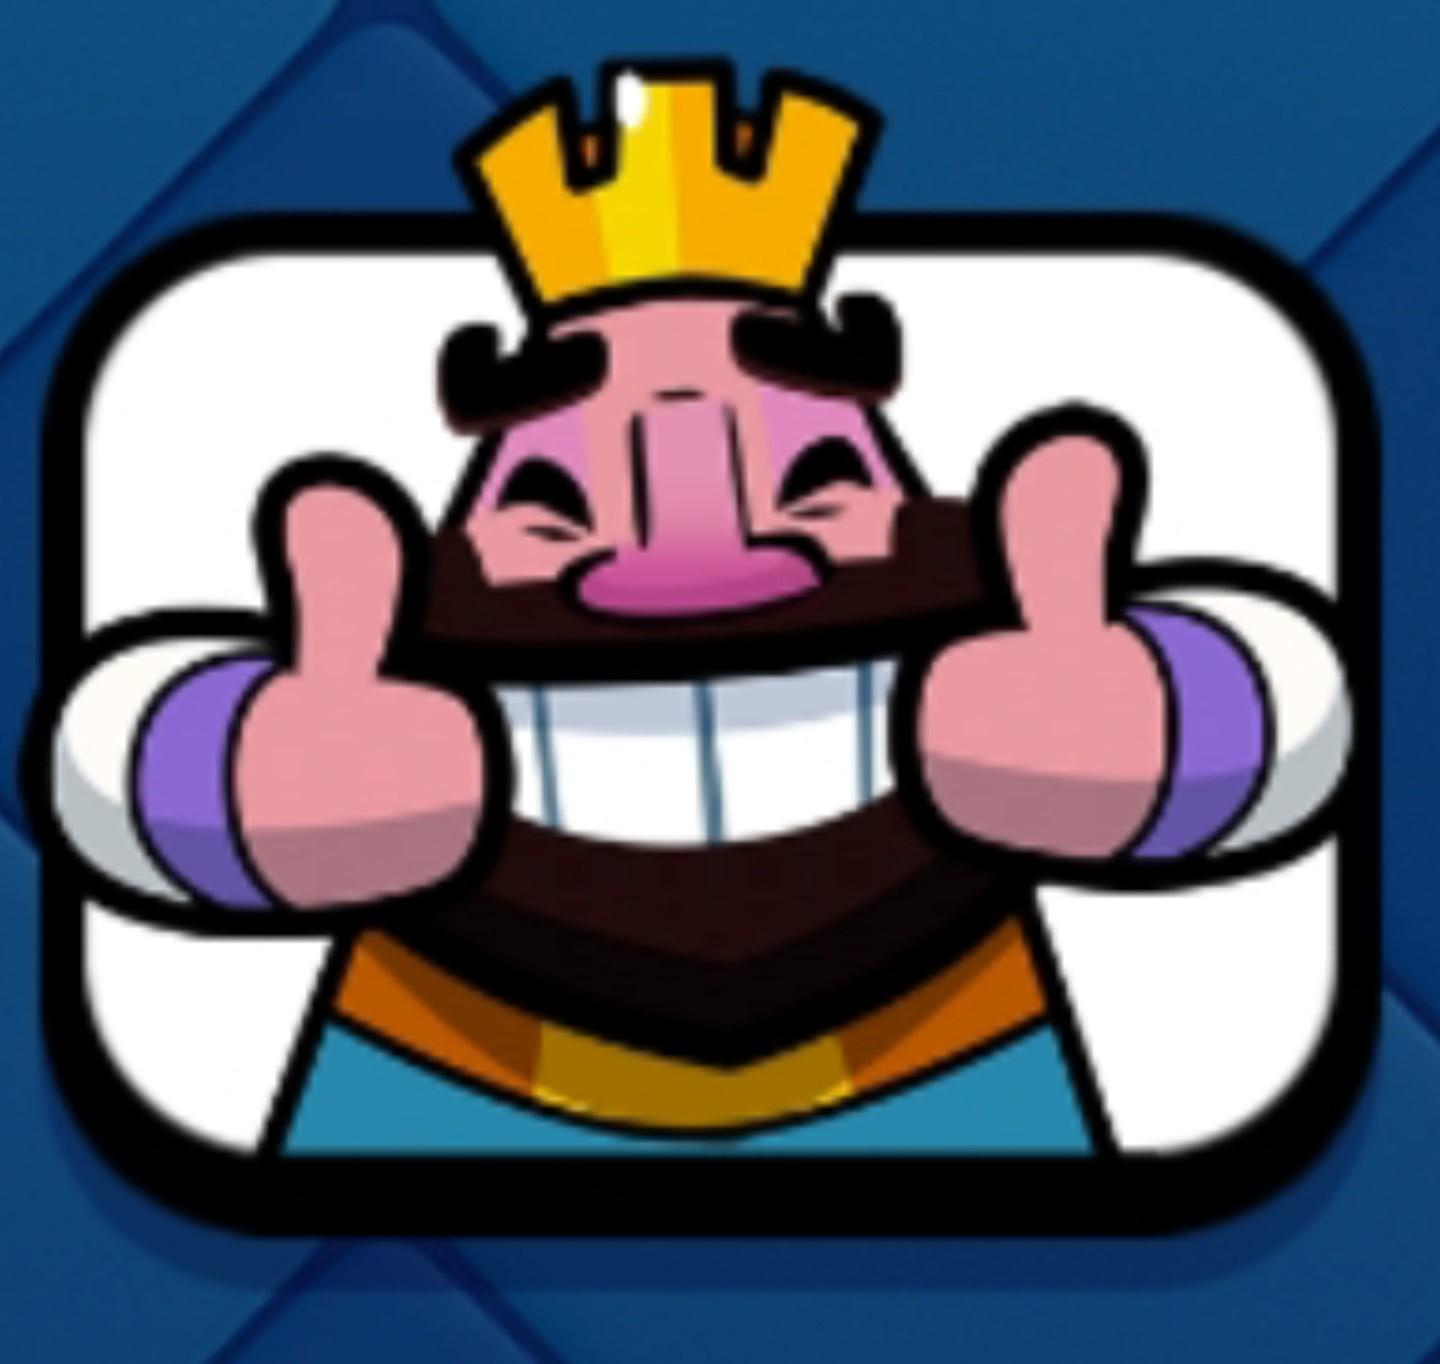 King Blink Emote concept 😏 (credits to tweeter skymography) #clashro